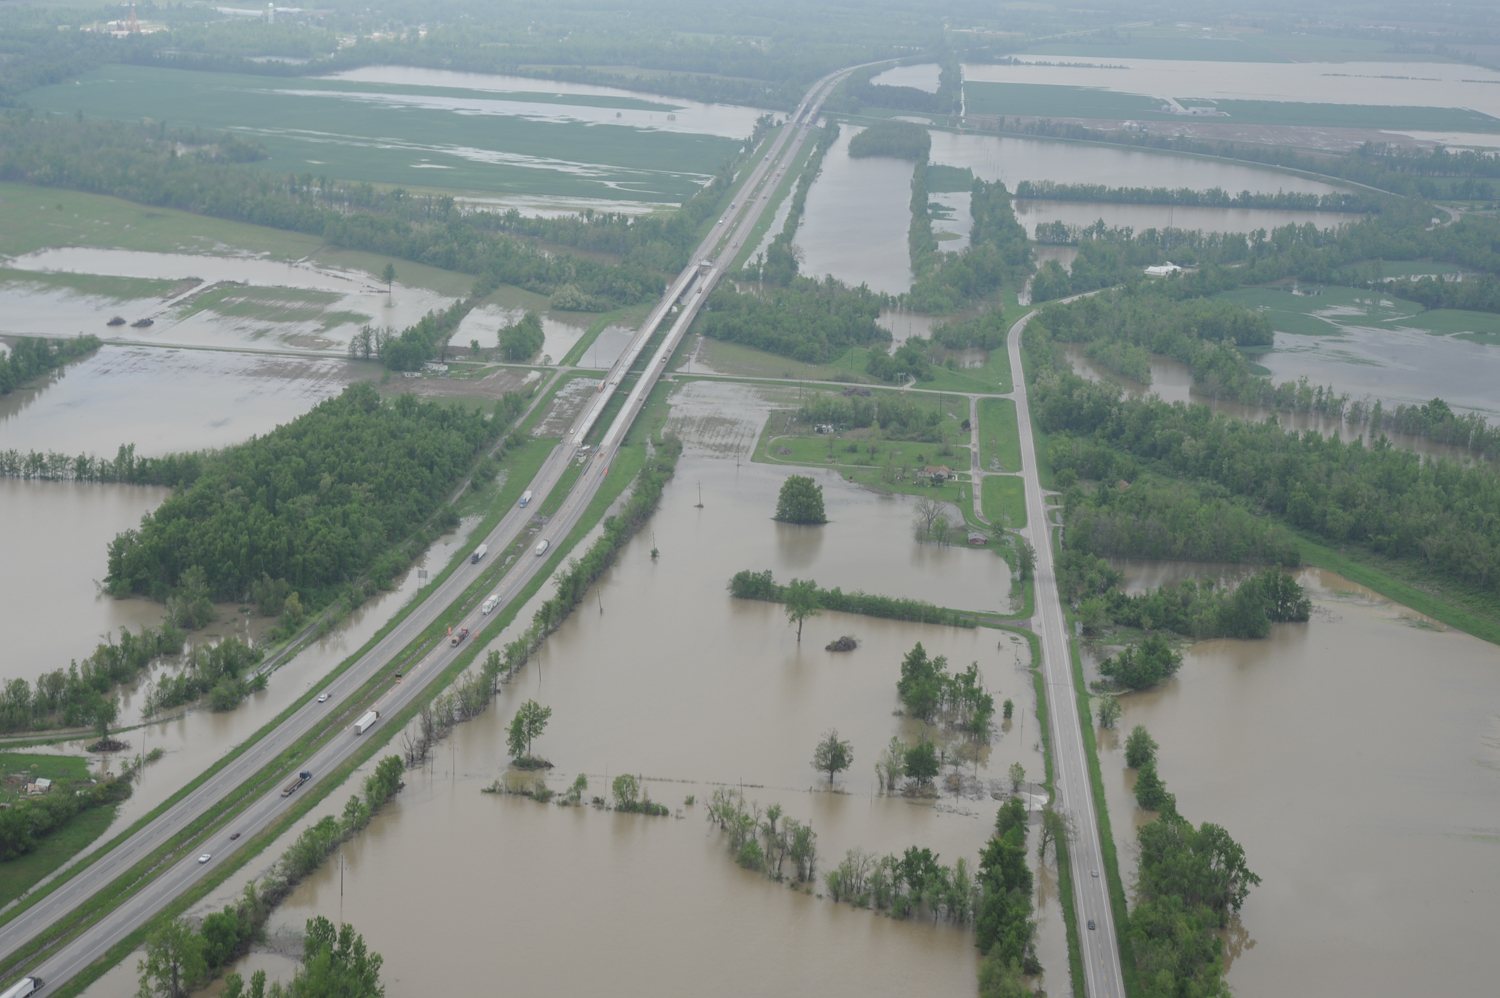 Cairo Leeve just broke – New Madrid floodway